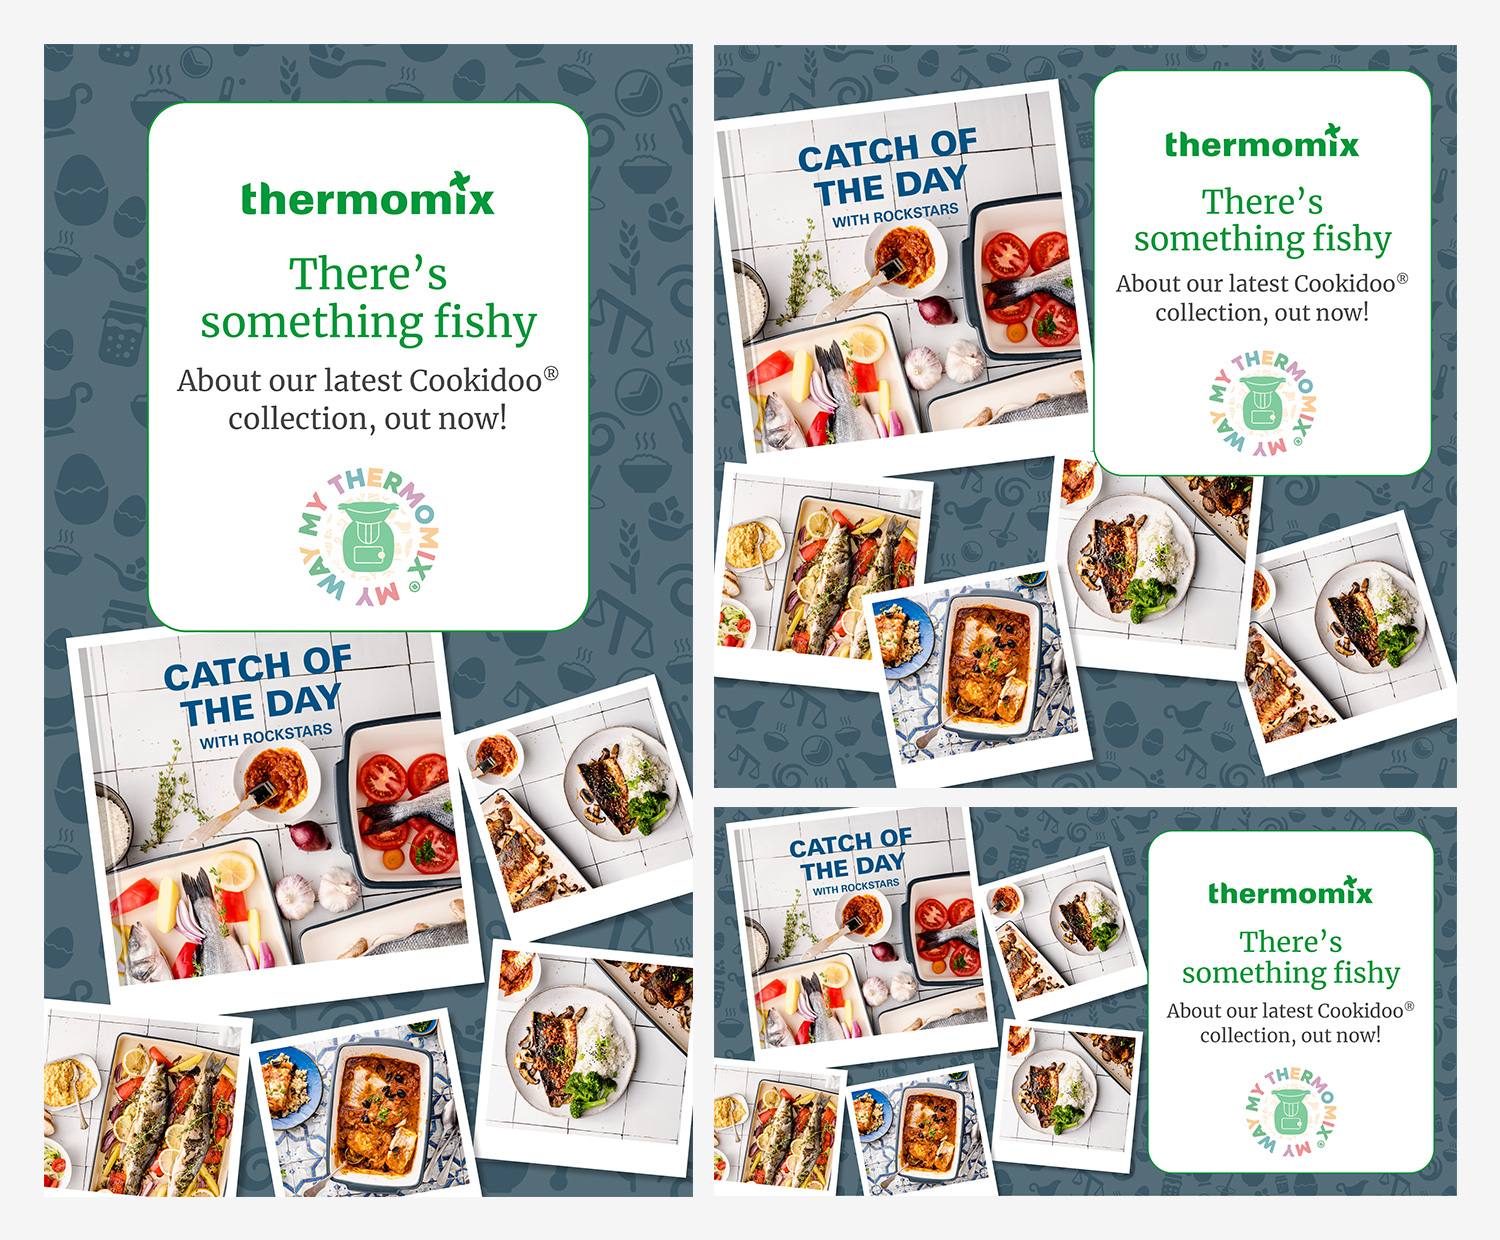 My Thermomix My Way Campaign for Vorwerk | Cookidoo Social Posts